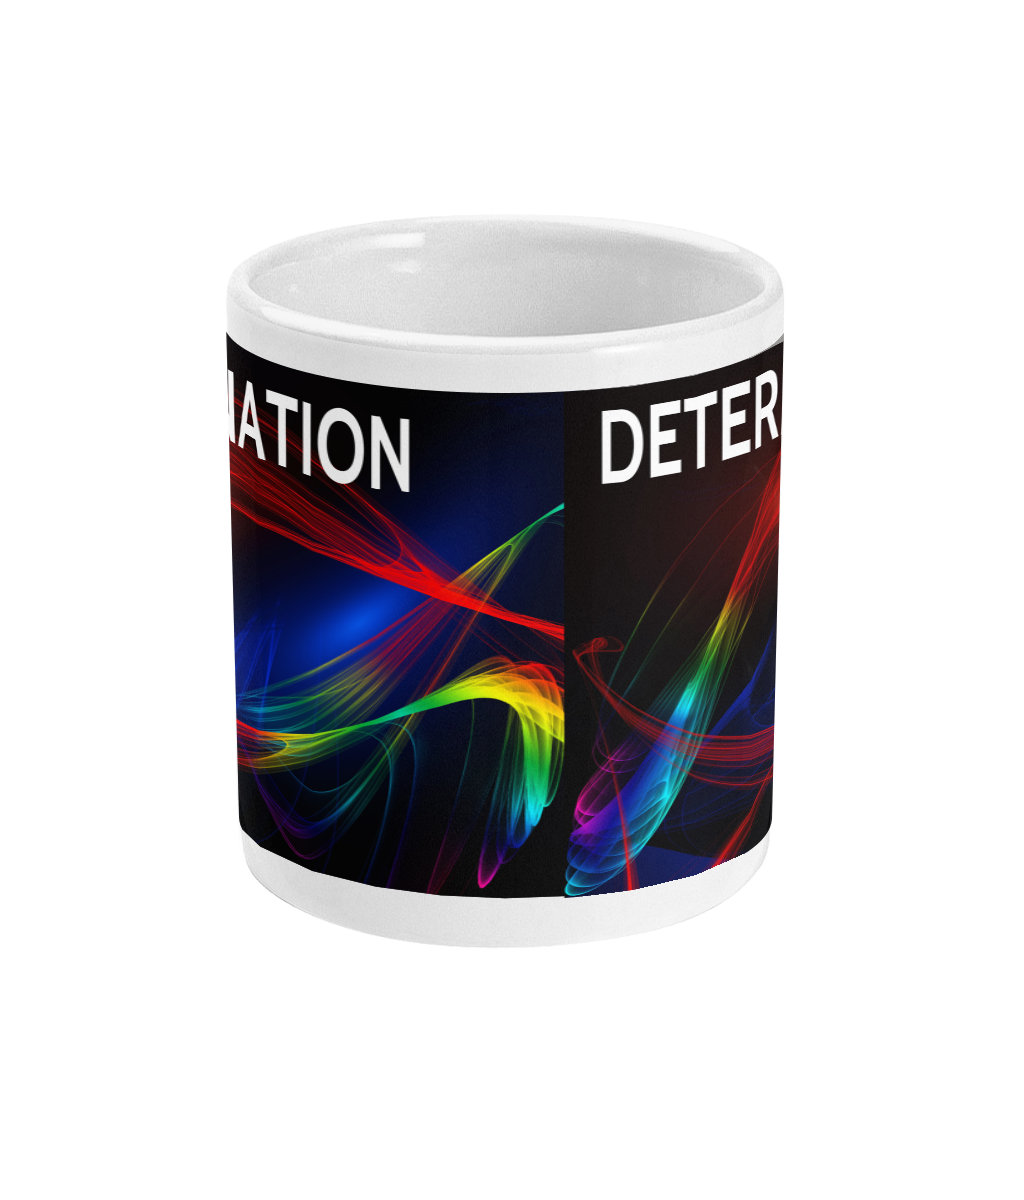 Drinking Mug with the word "Determination"